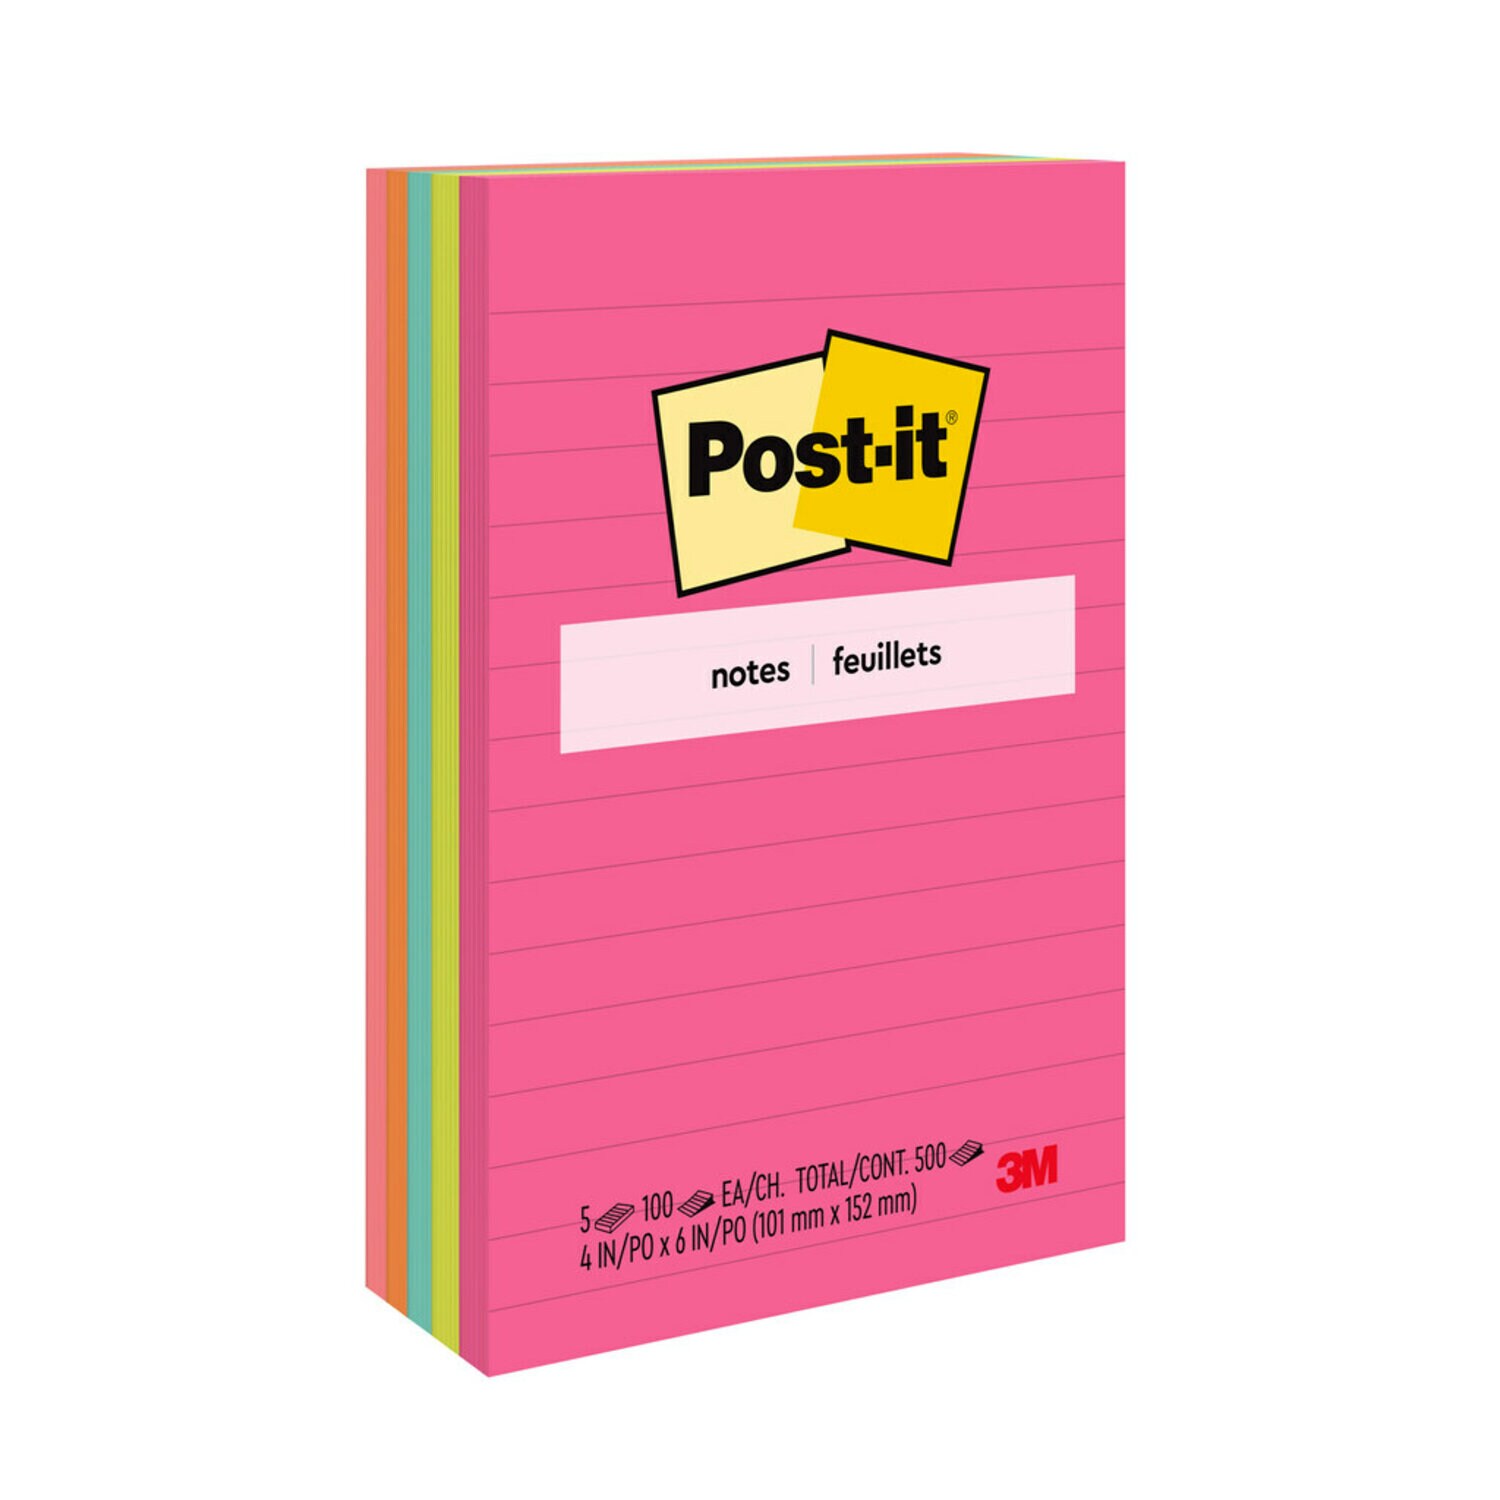 7100133152 - Post-it Notes, 660-5AN, 4 in x 6 in (101 mm x 152 mm)